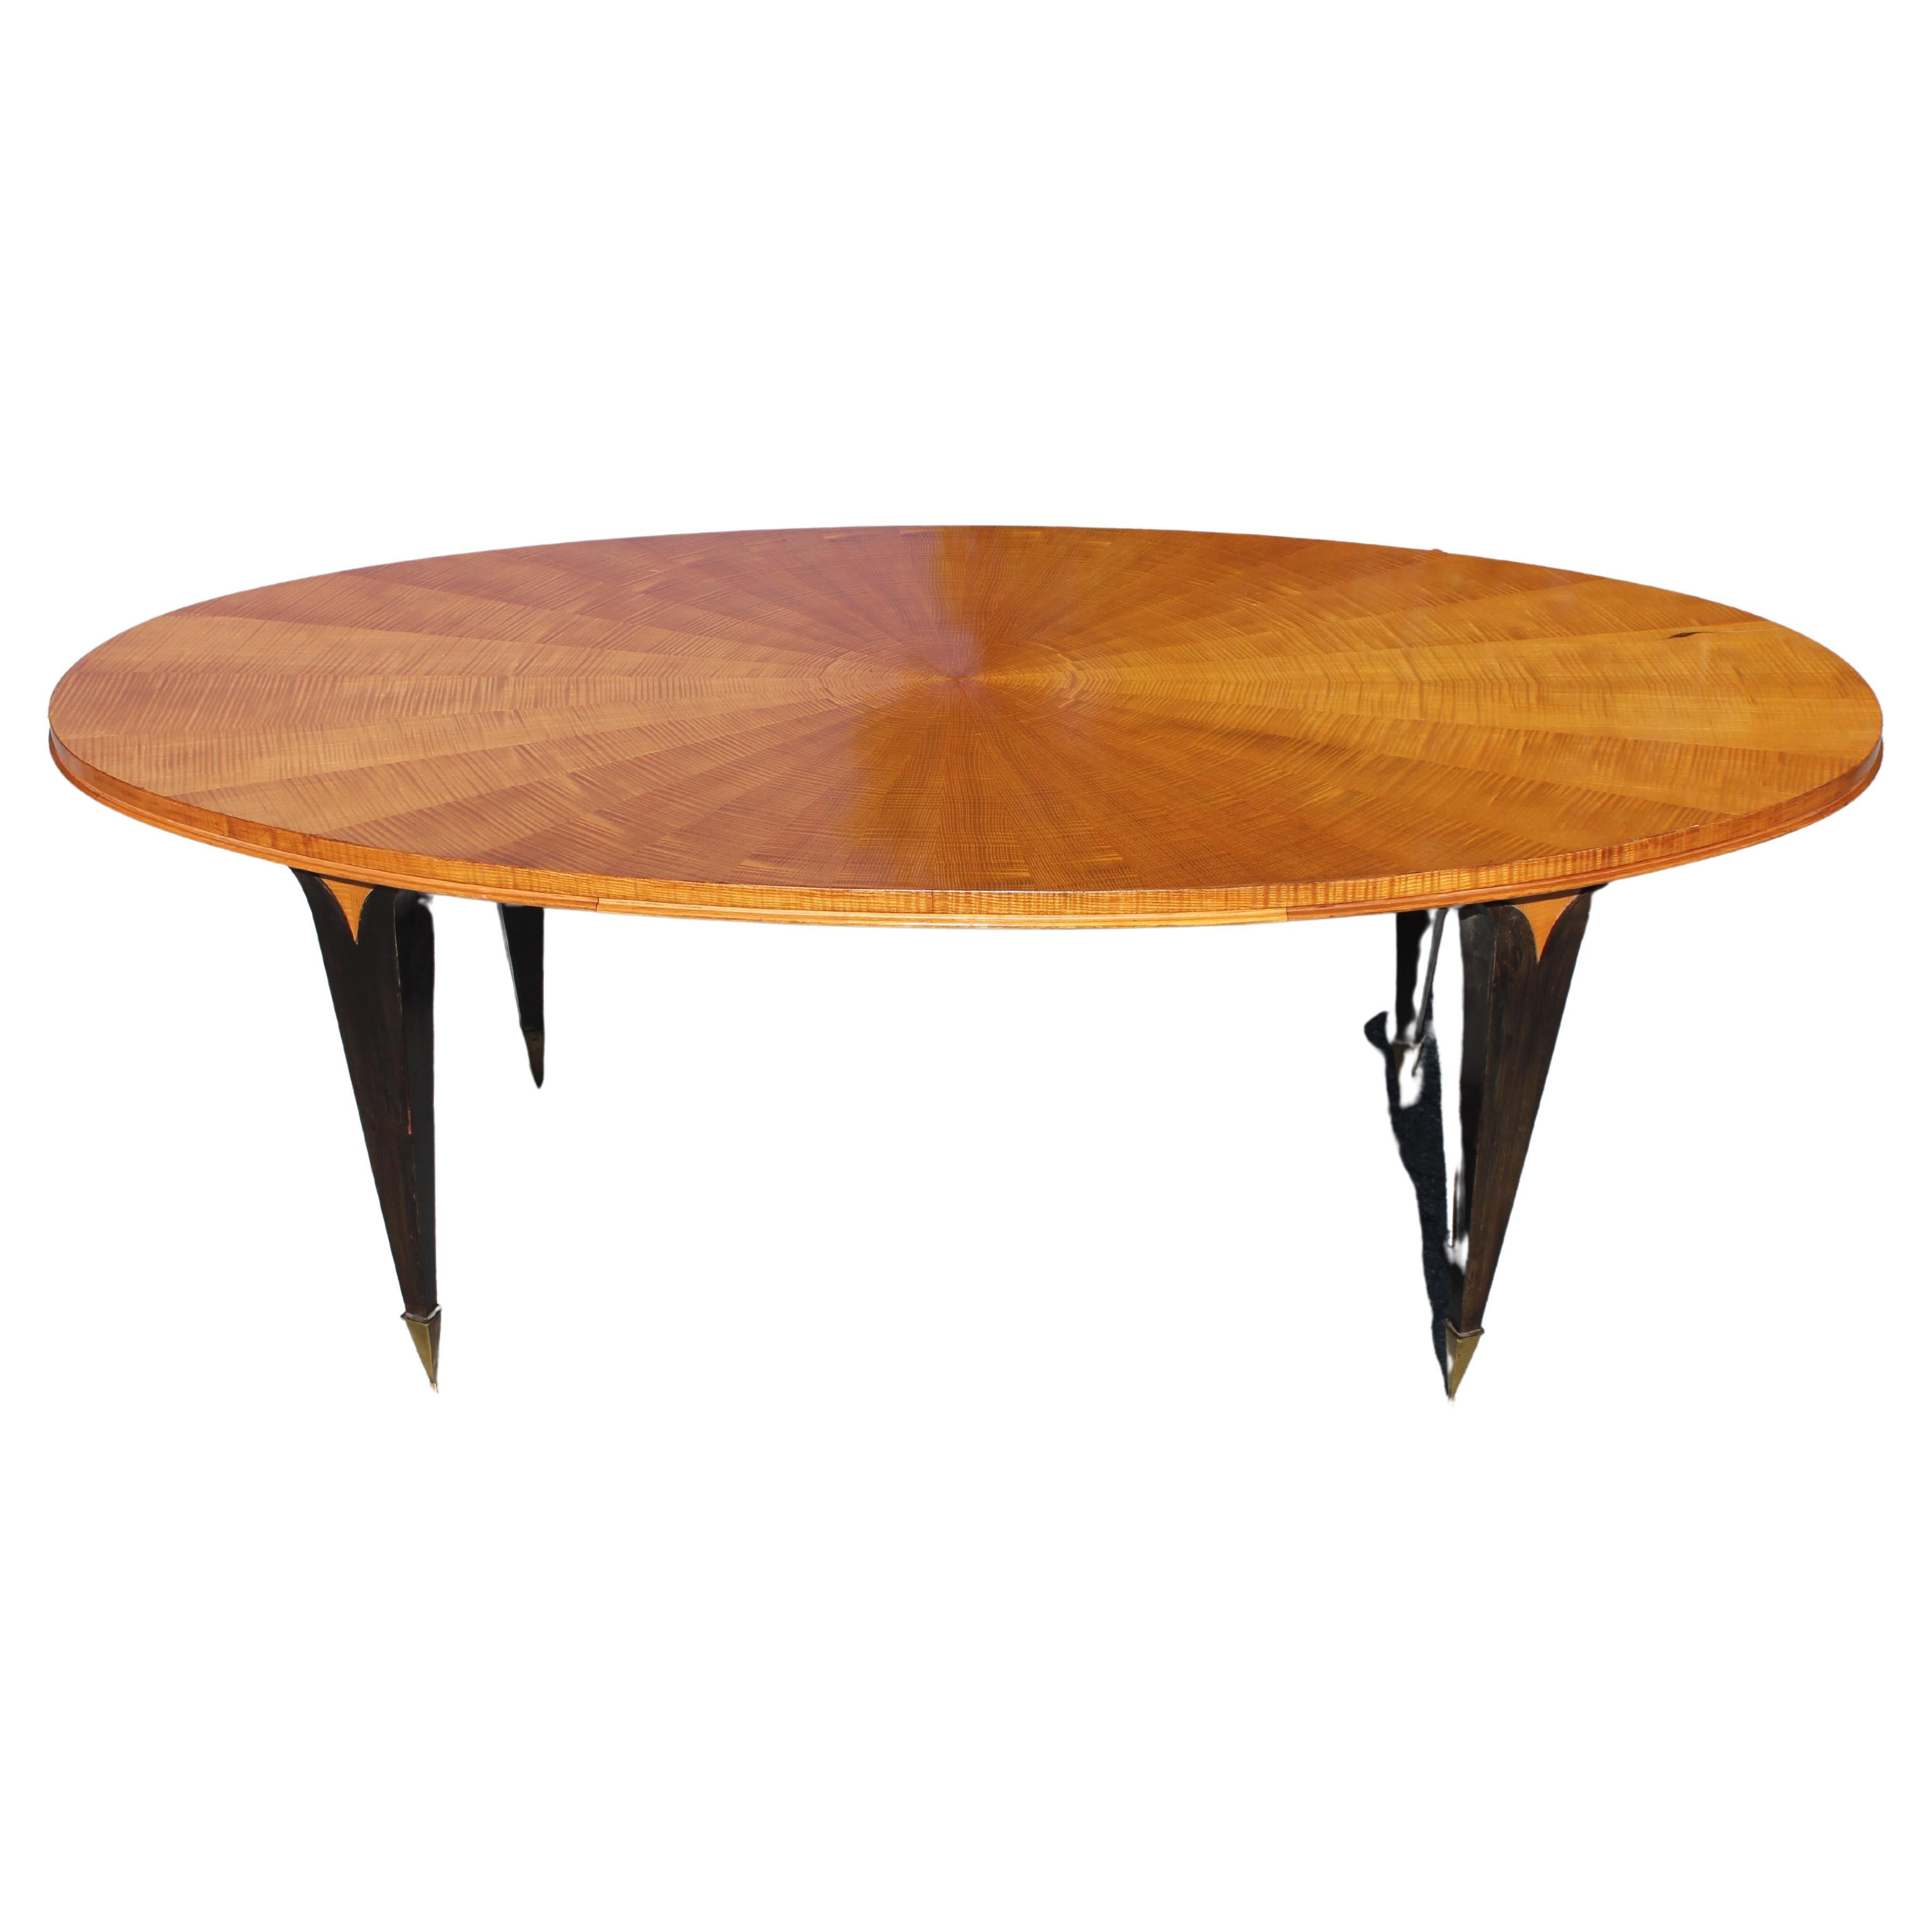 1940's French Art Deco Spectacular Sycamore Inlaid "Sunburst" Dining Table